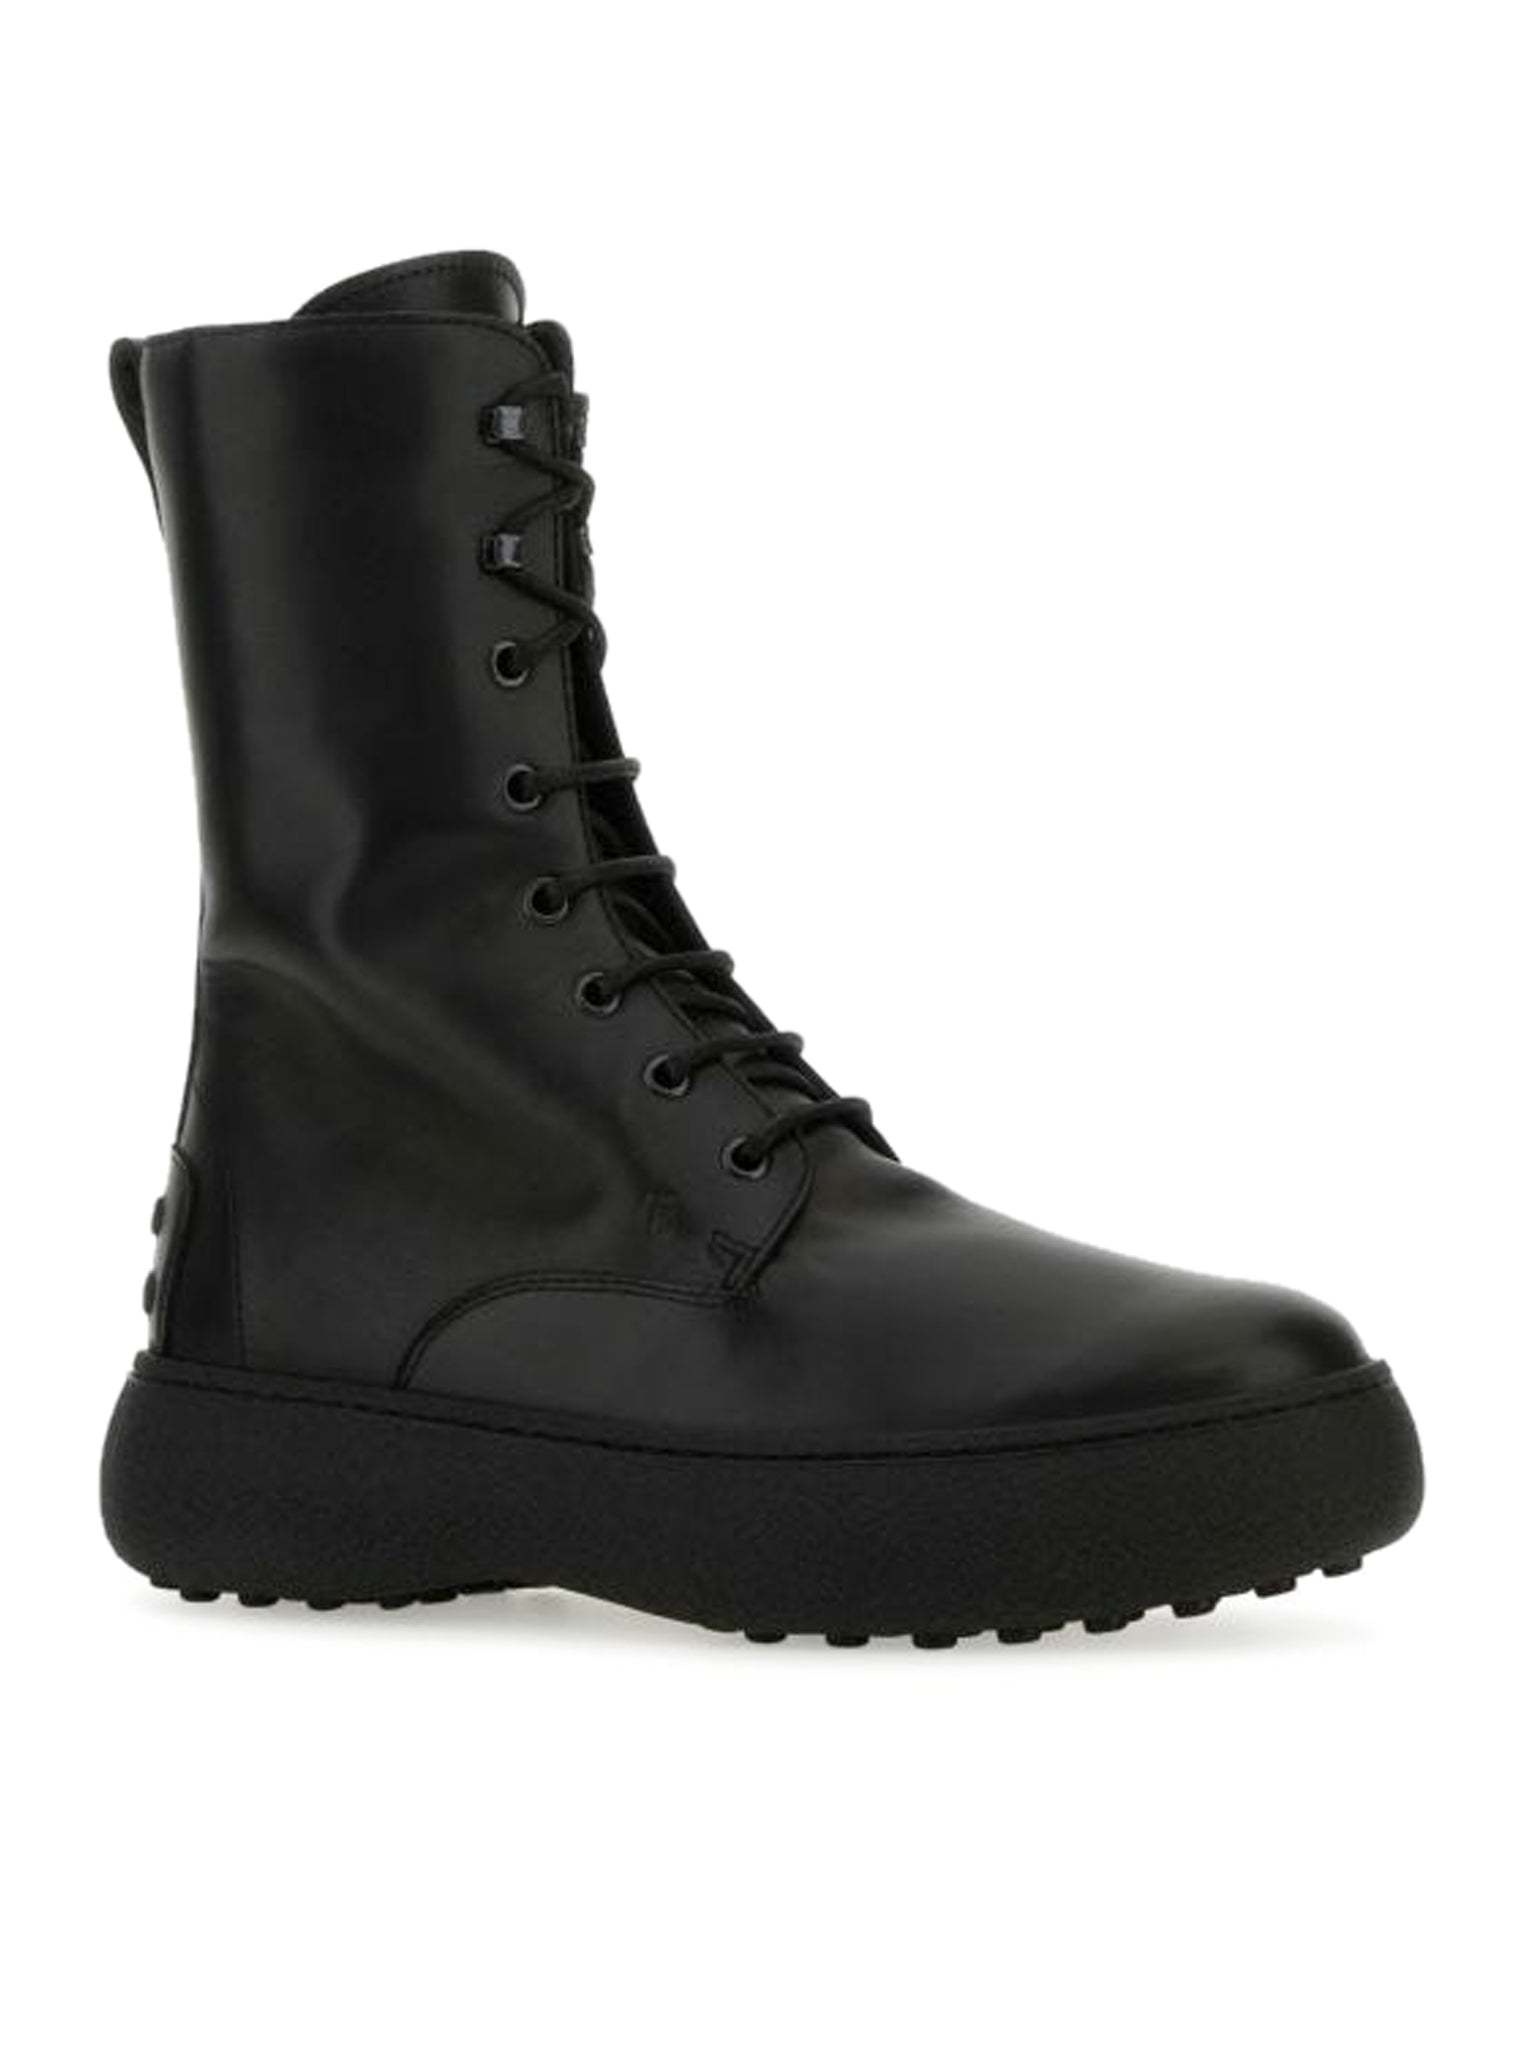 W. G. ankle boots in black leather